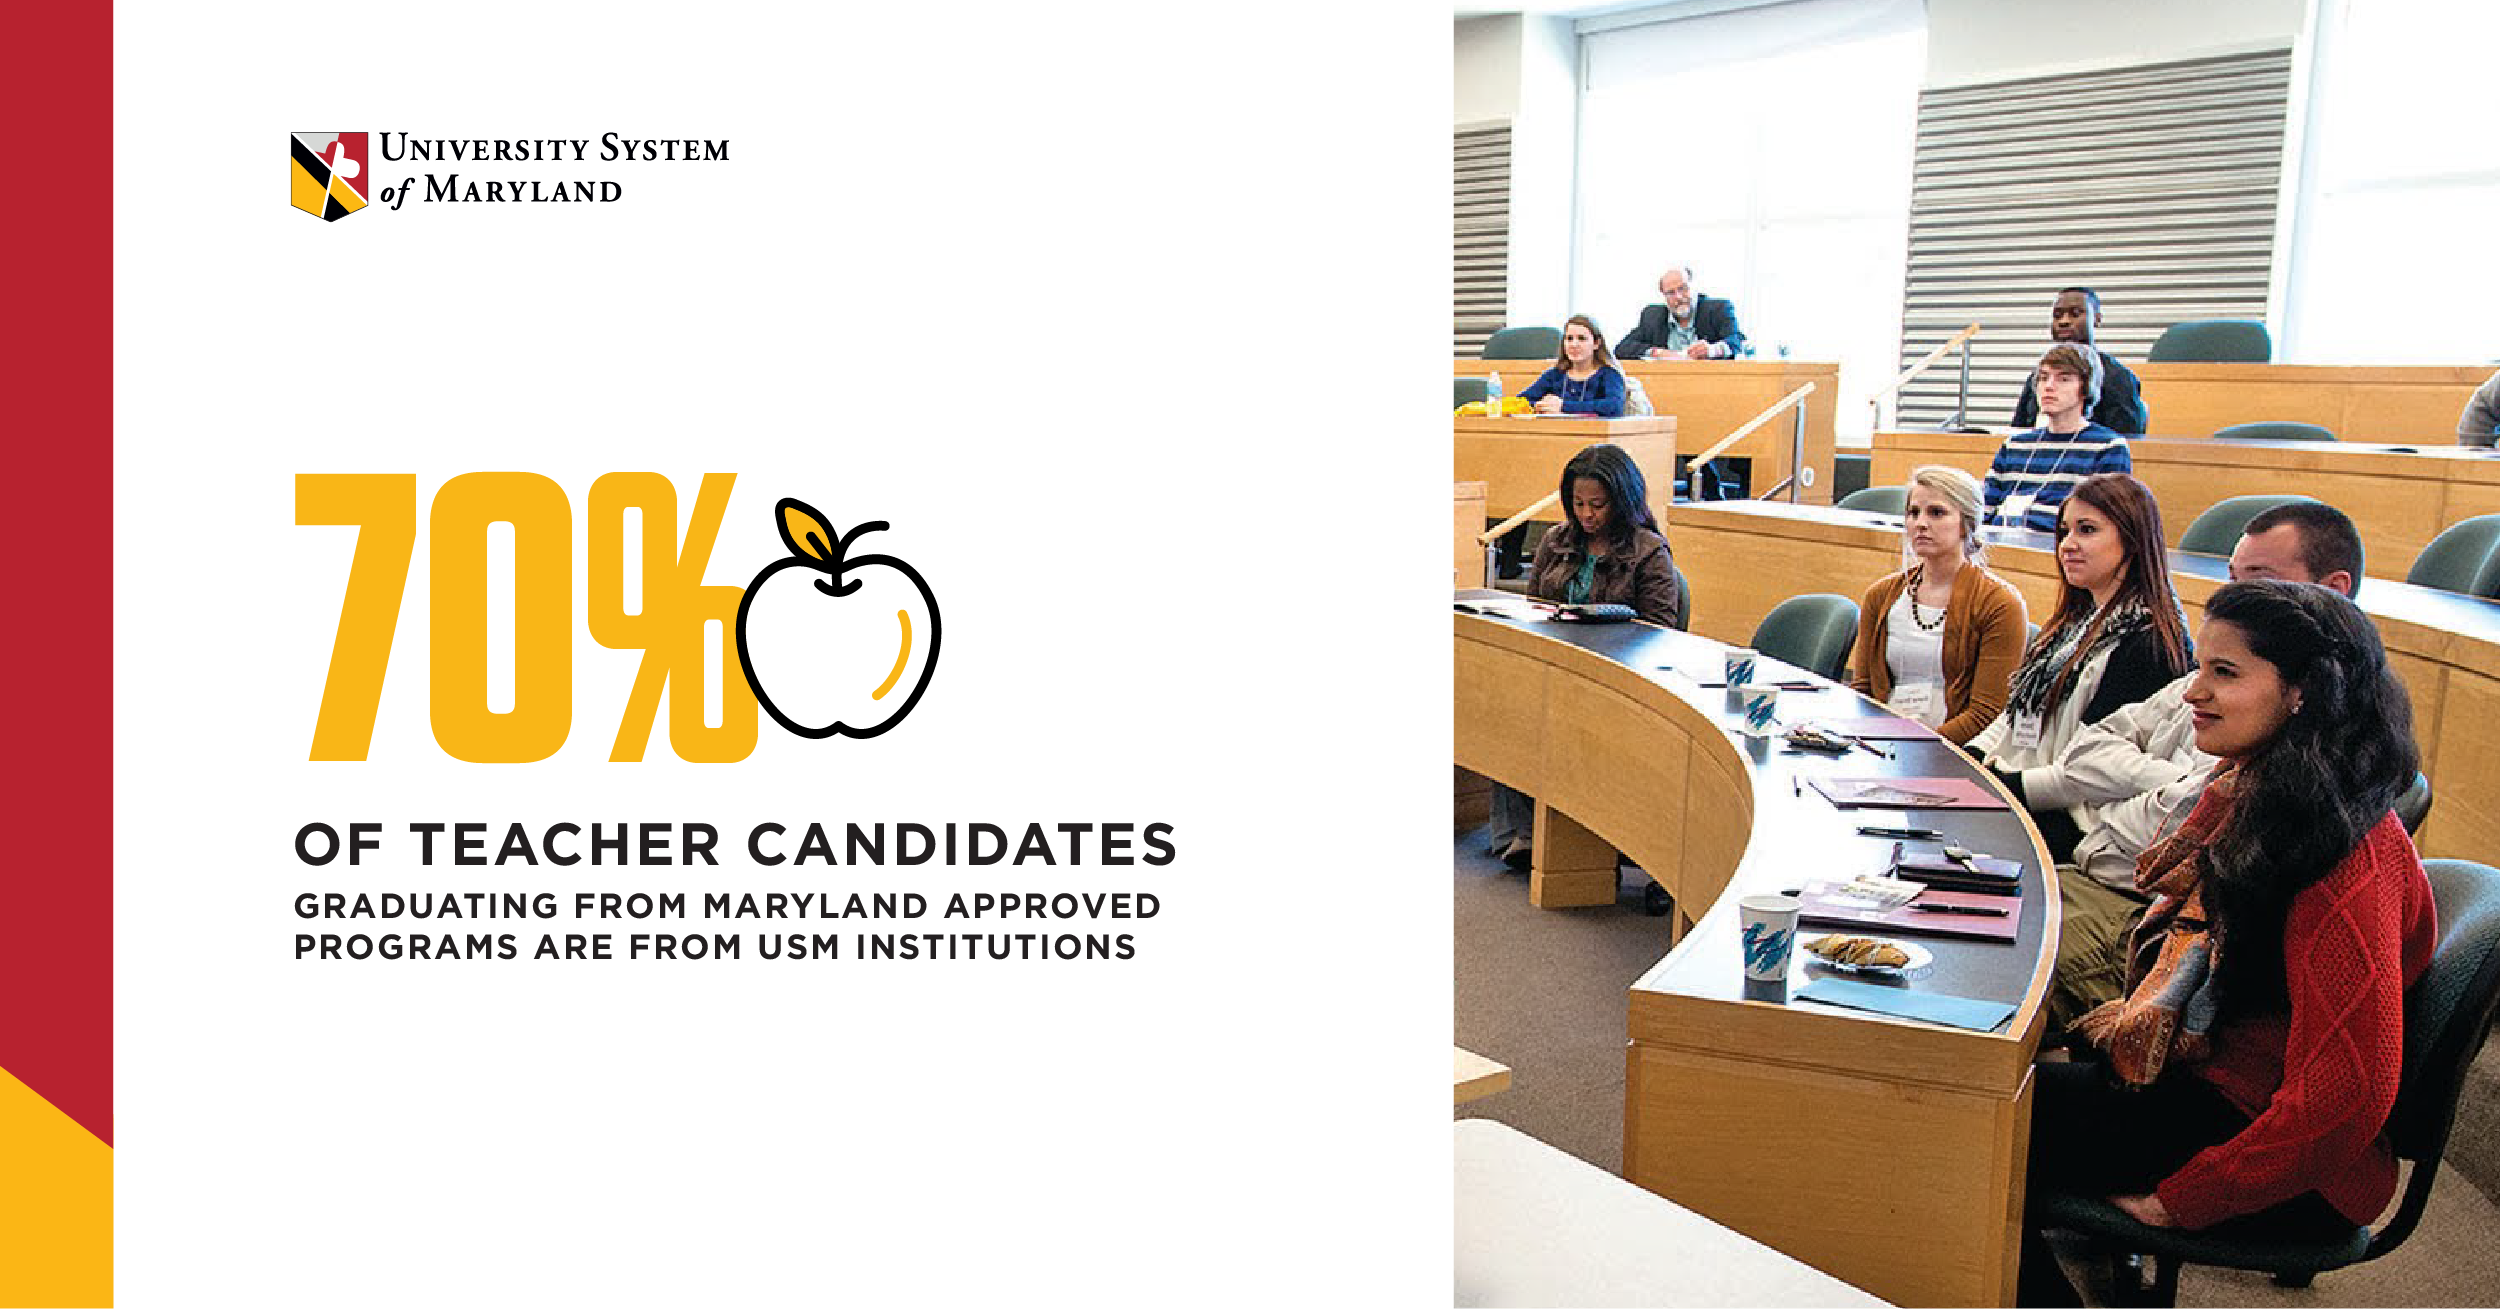 70% of Teacher Candidates Graduating from Maryland Approved Programs are from USM Institutions